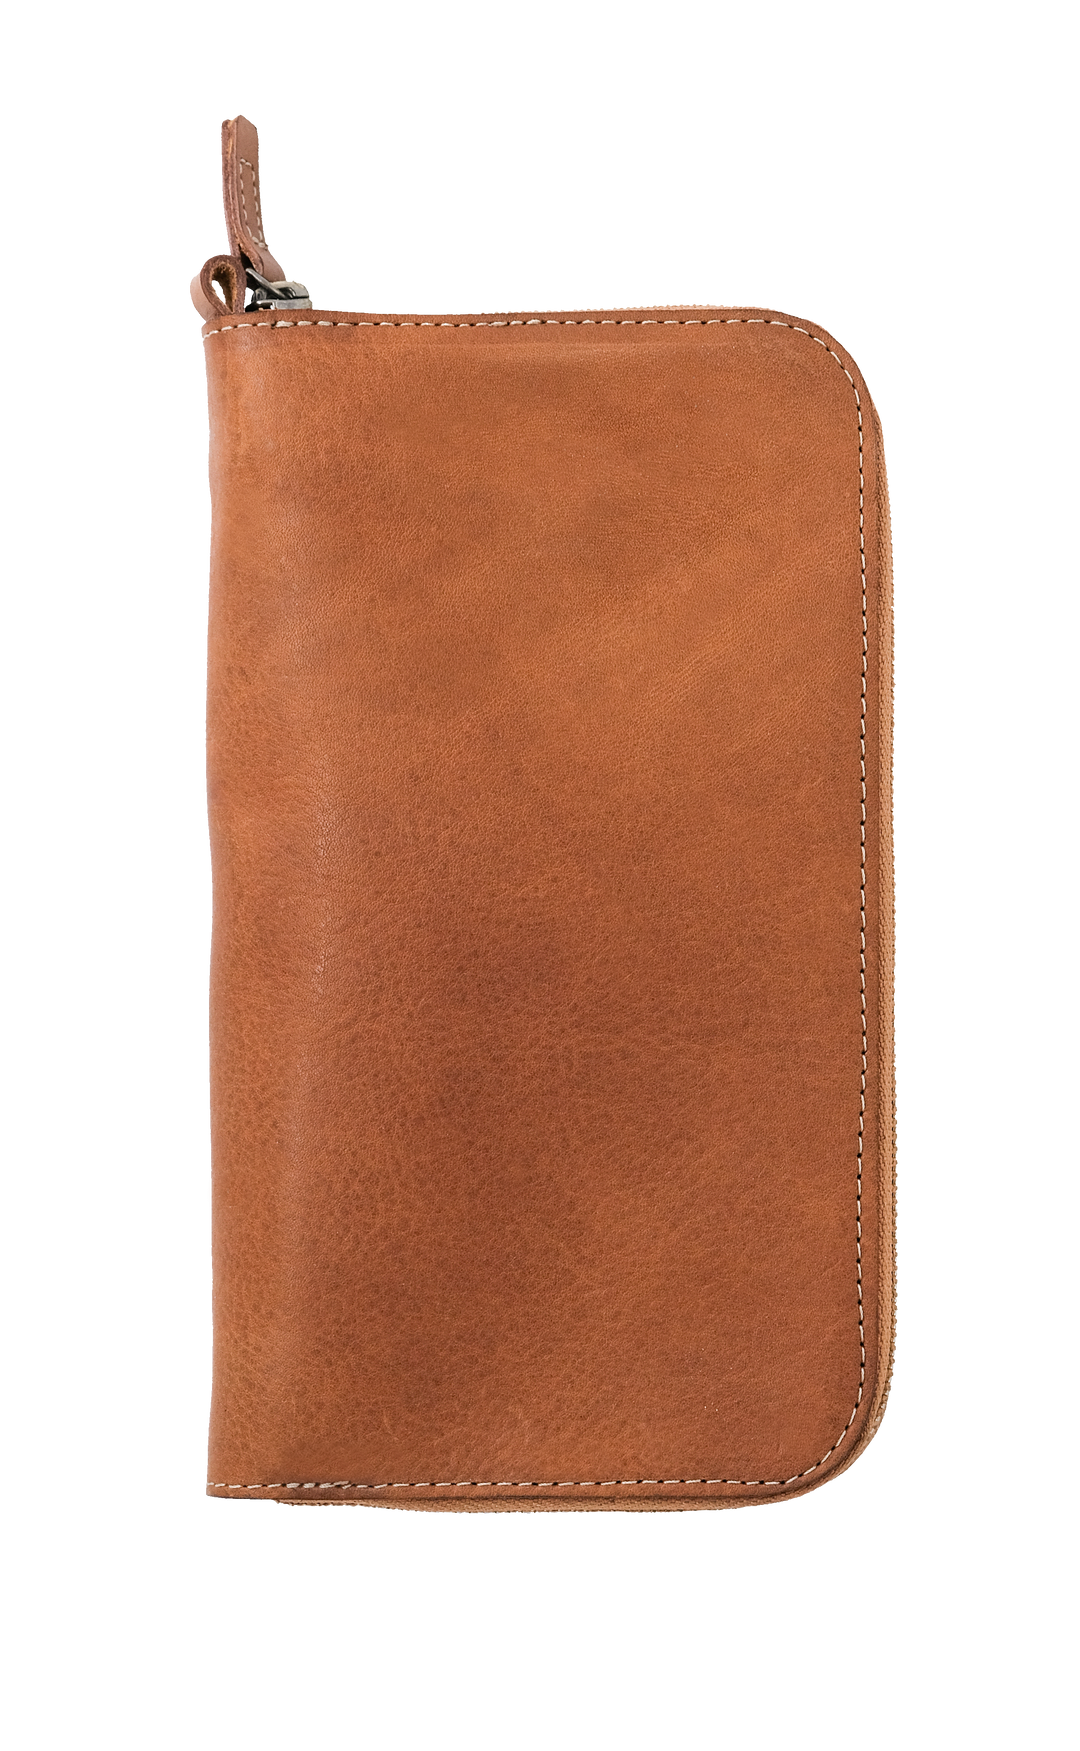 Kato Accountant Leather Travel Wallet - Roots Collective PH